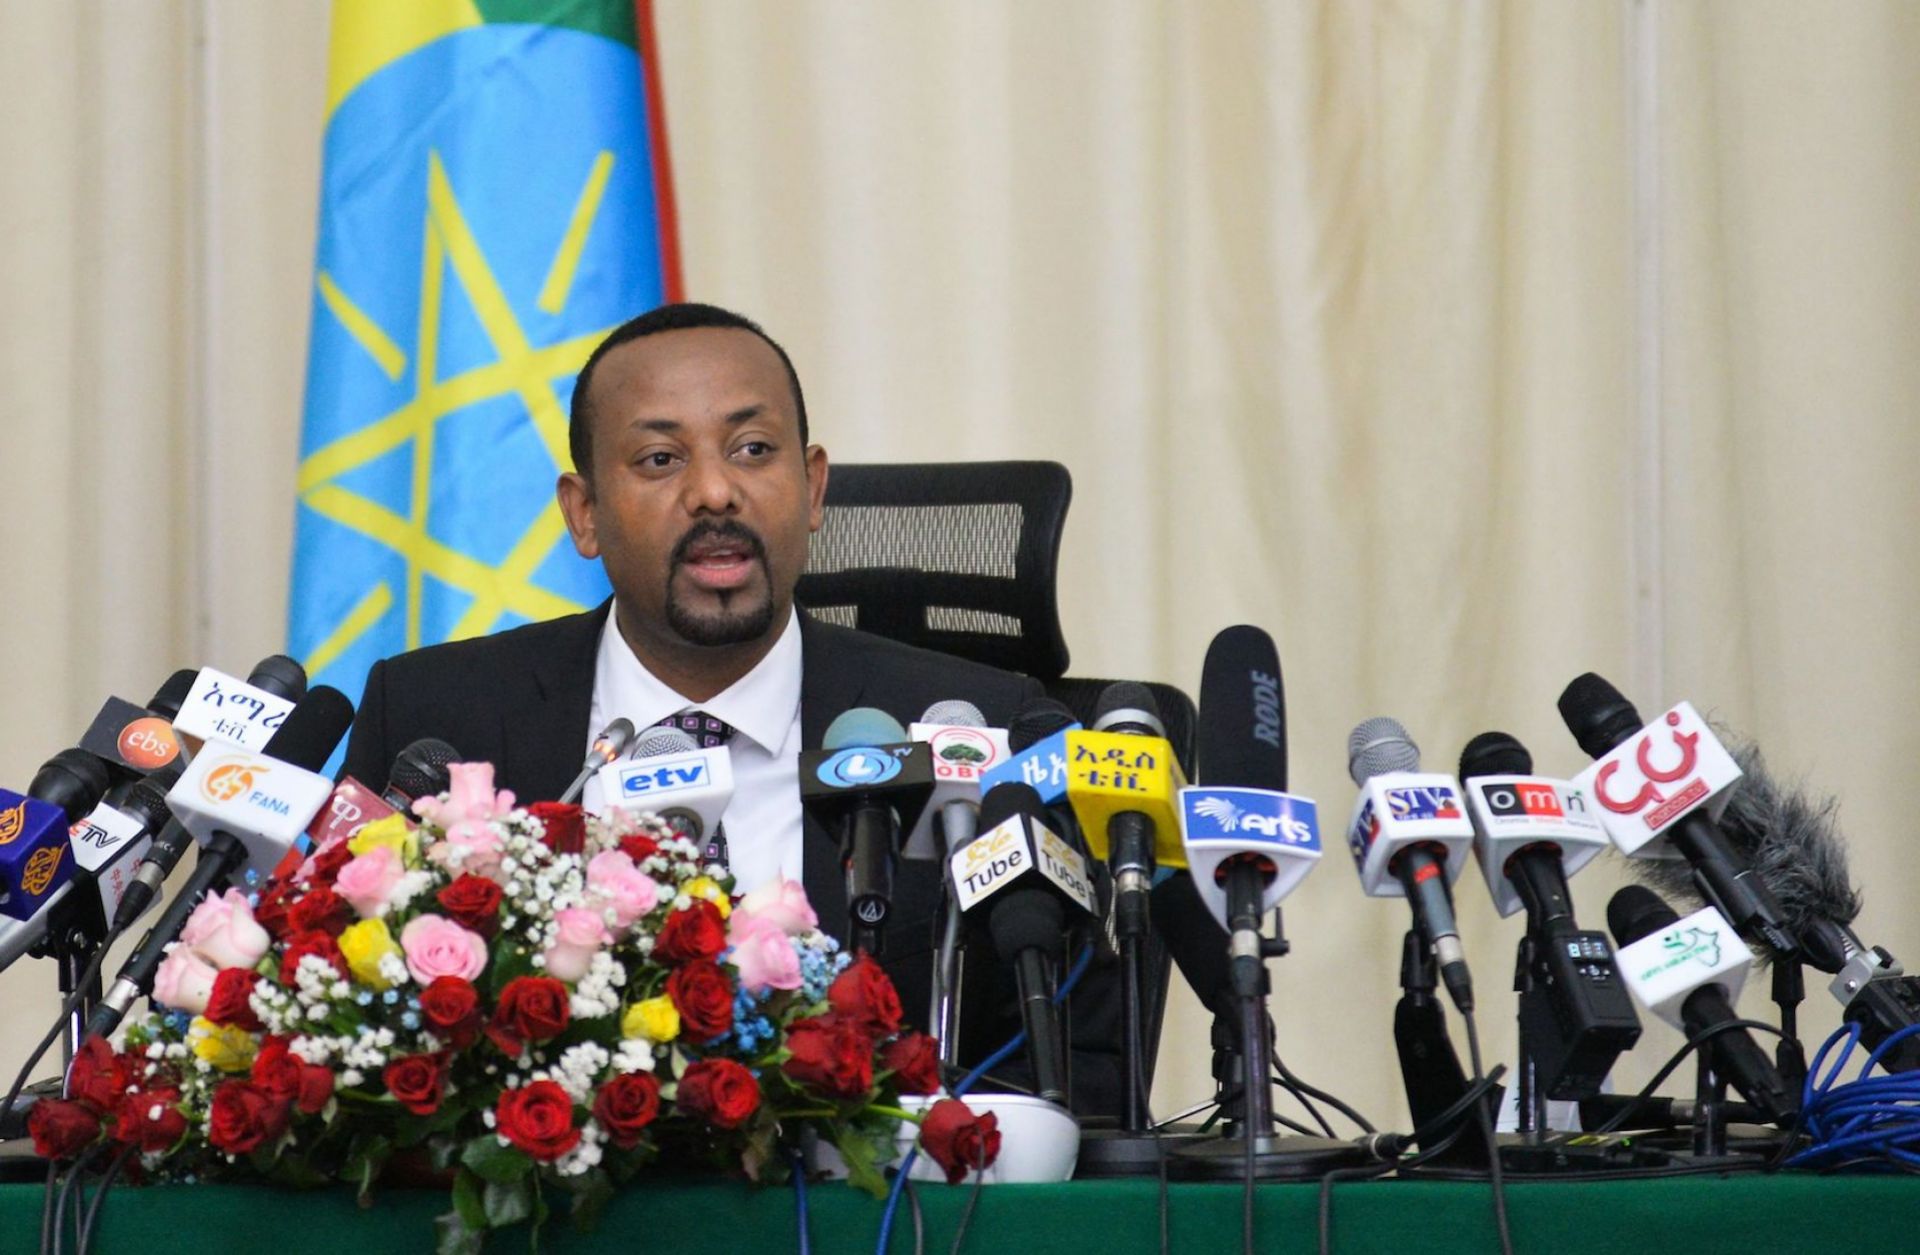 Since taking office, Ethiopian Prime Minister Abiy Ahmed has pushed ambitious reforms and local and regional reconciliation.